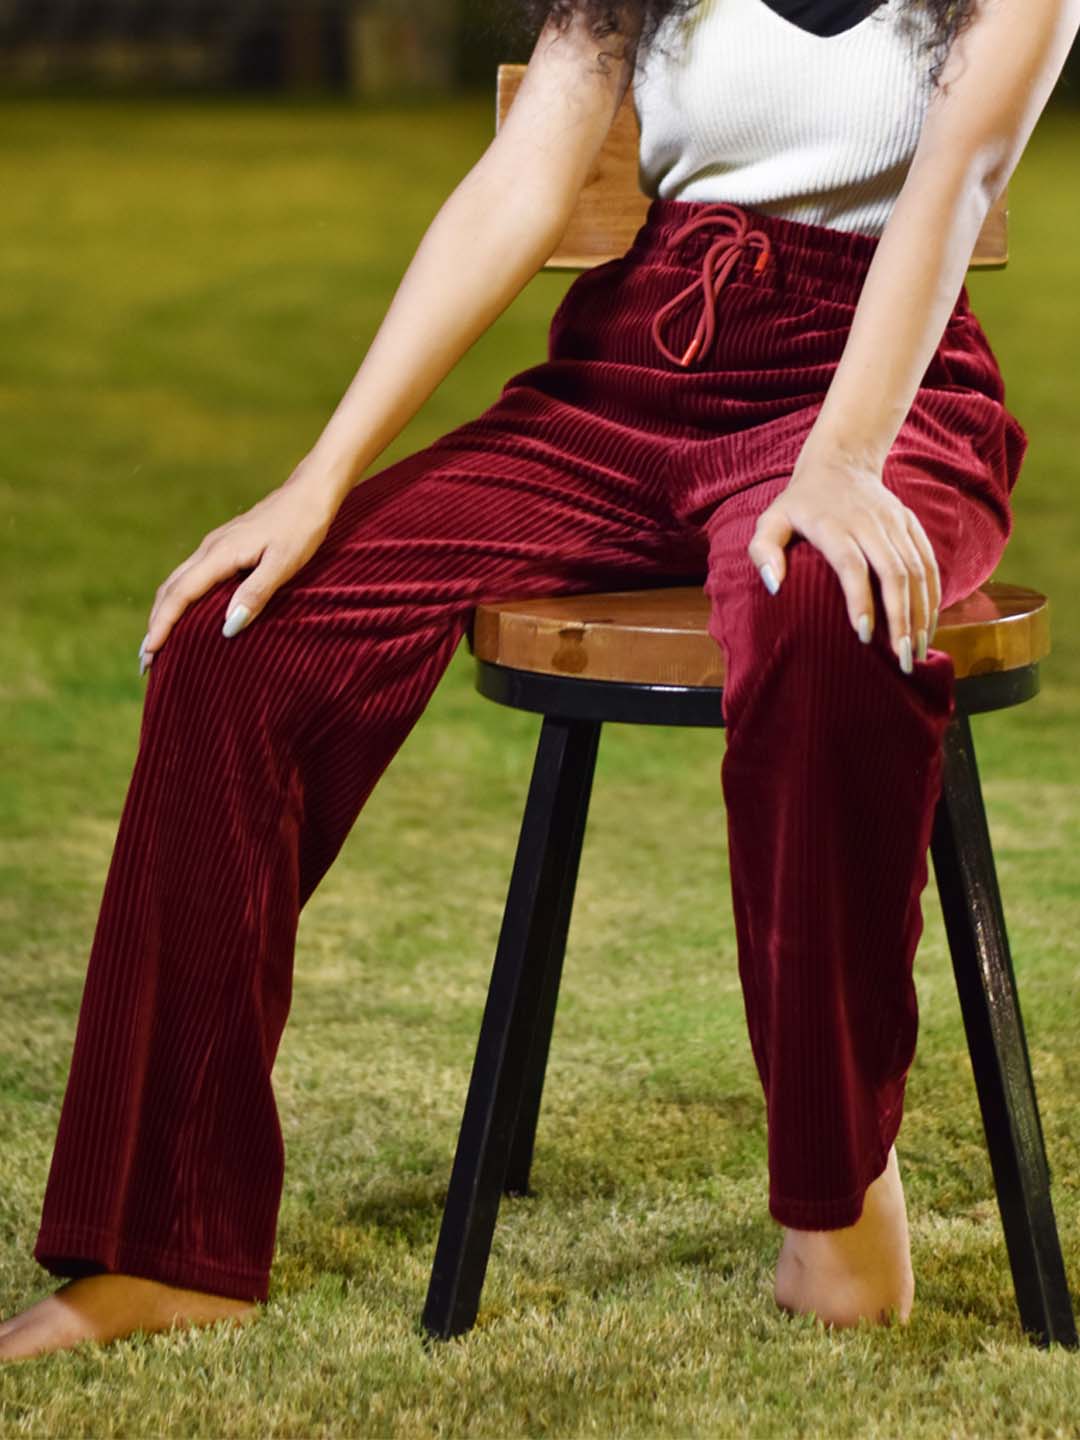 Buy Women Maroon Flared-Fit Palazzo Pants With Pockets Online